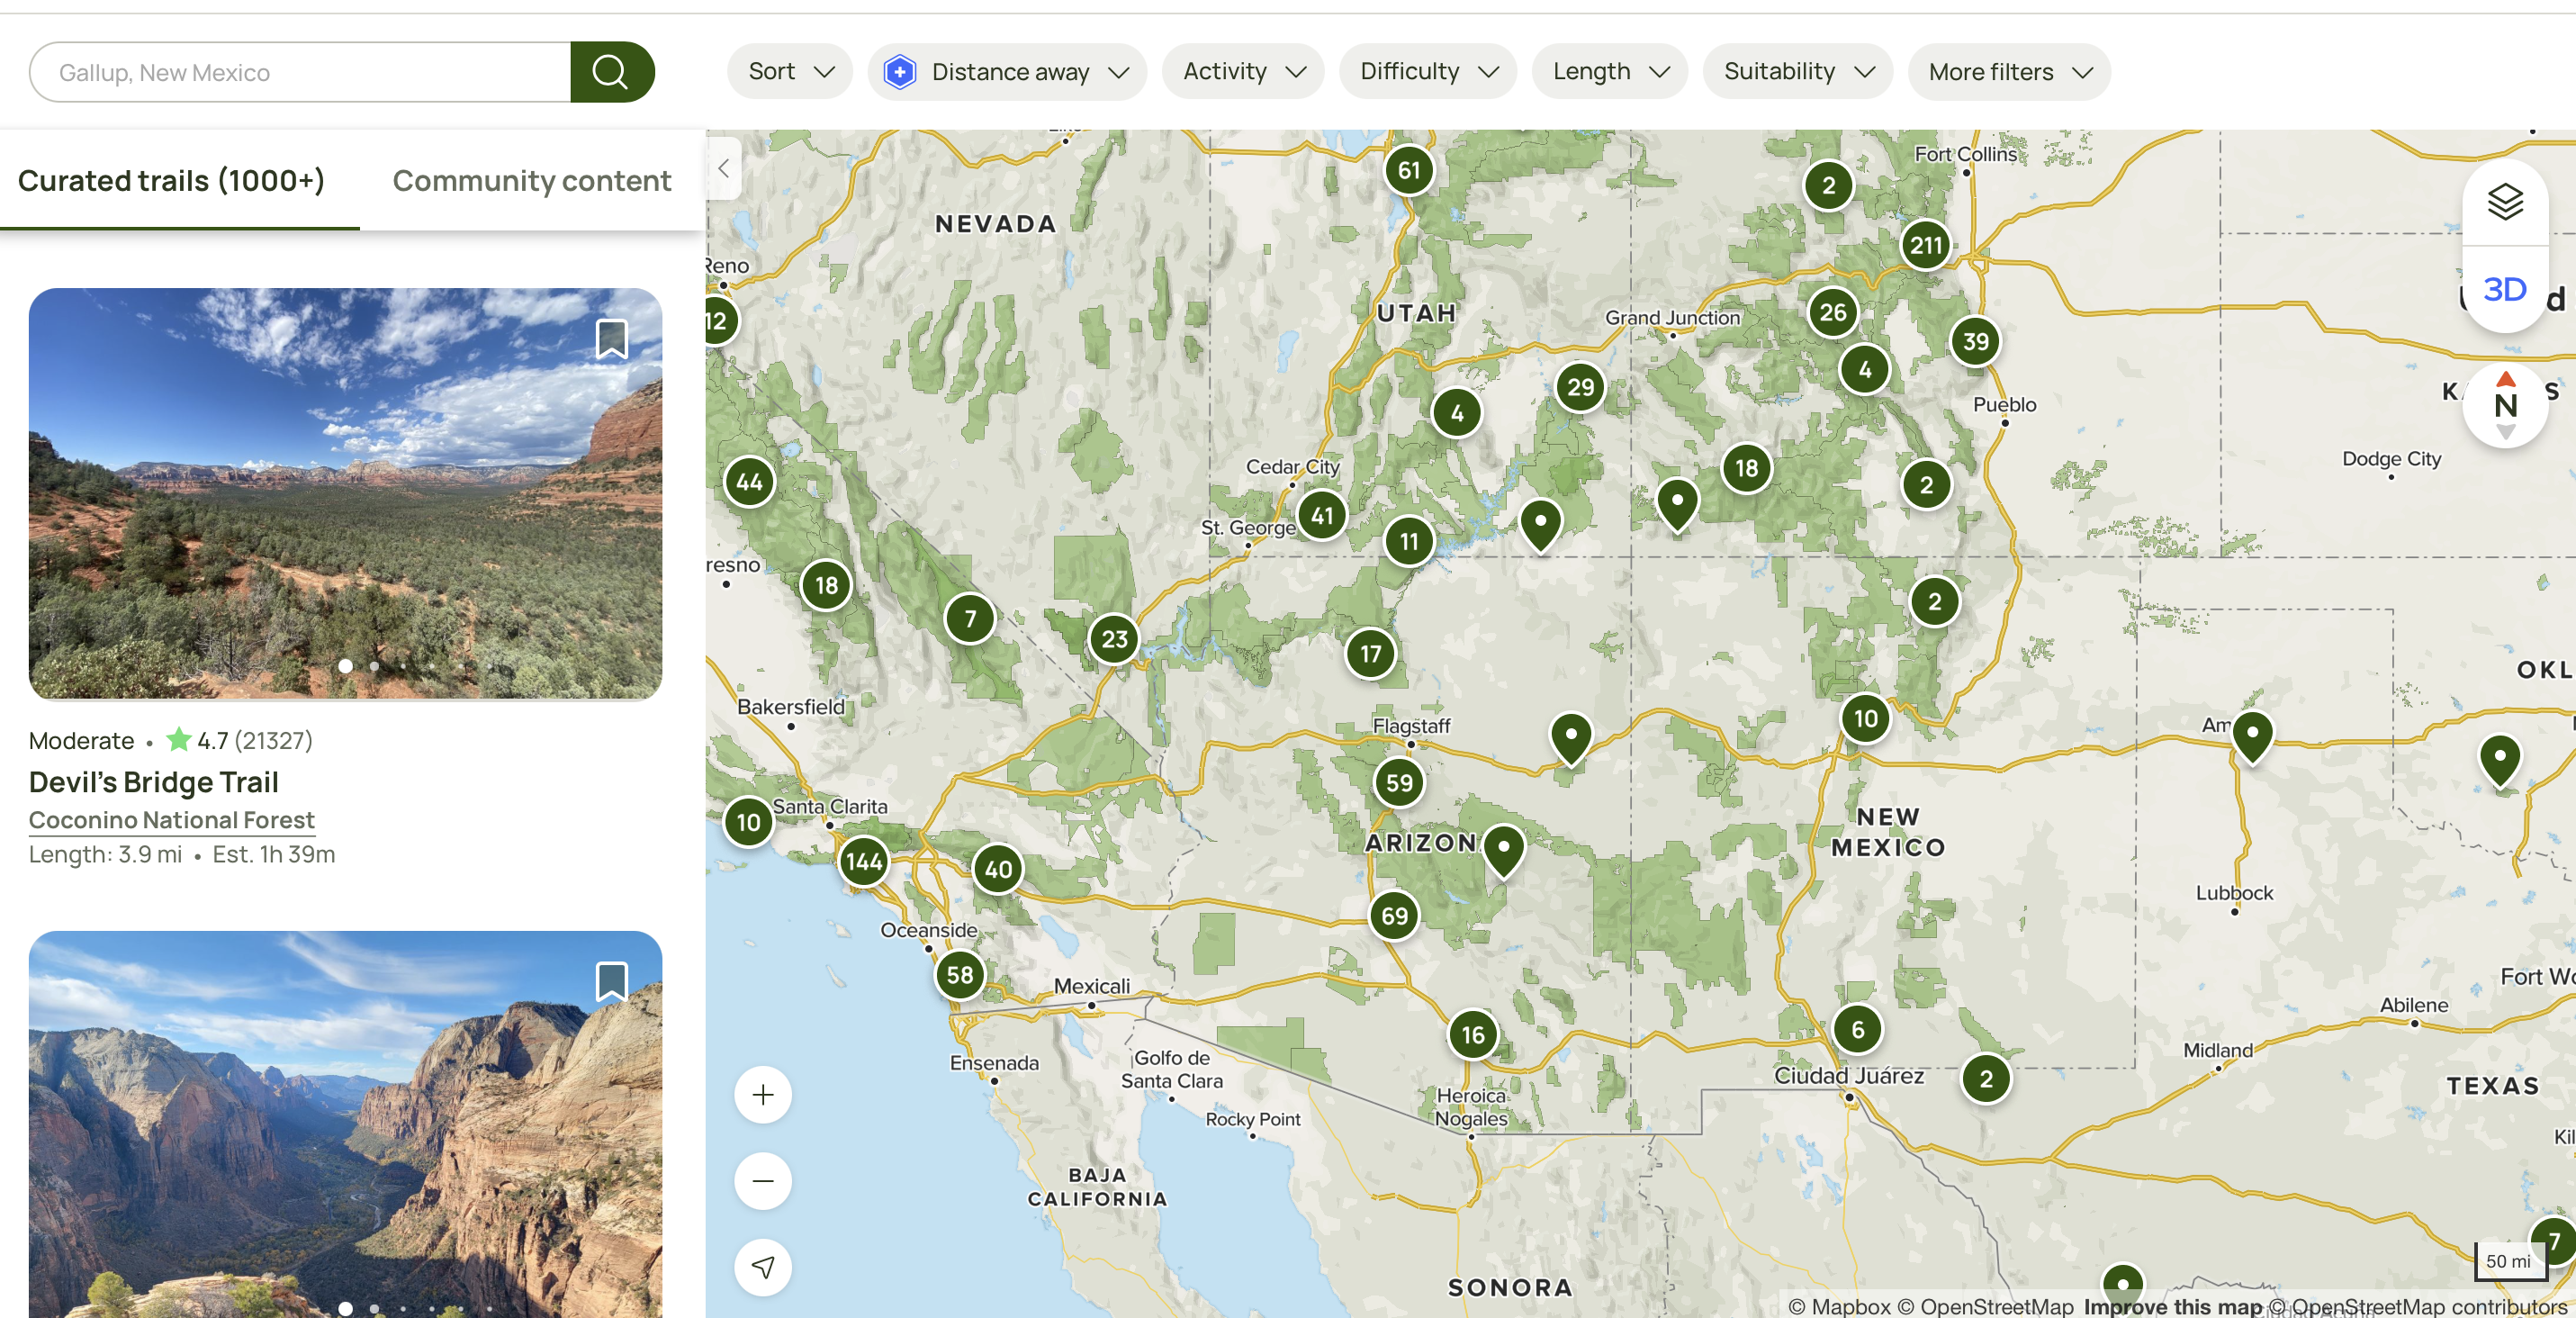 AllTrails is an essential app for finding hikes and walking trails during your road trip